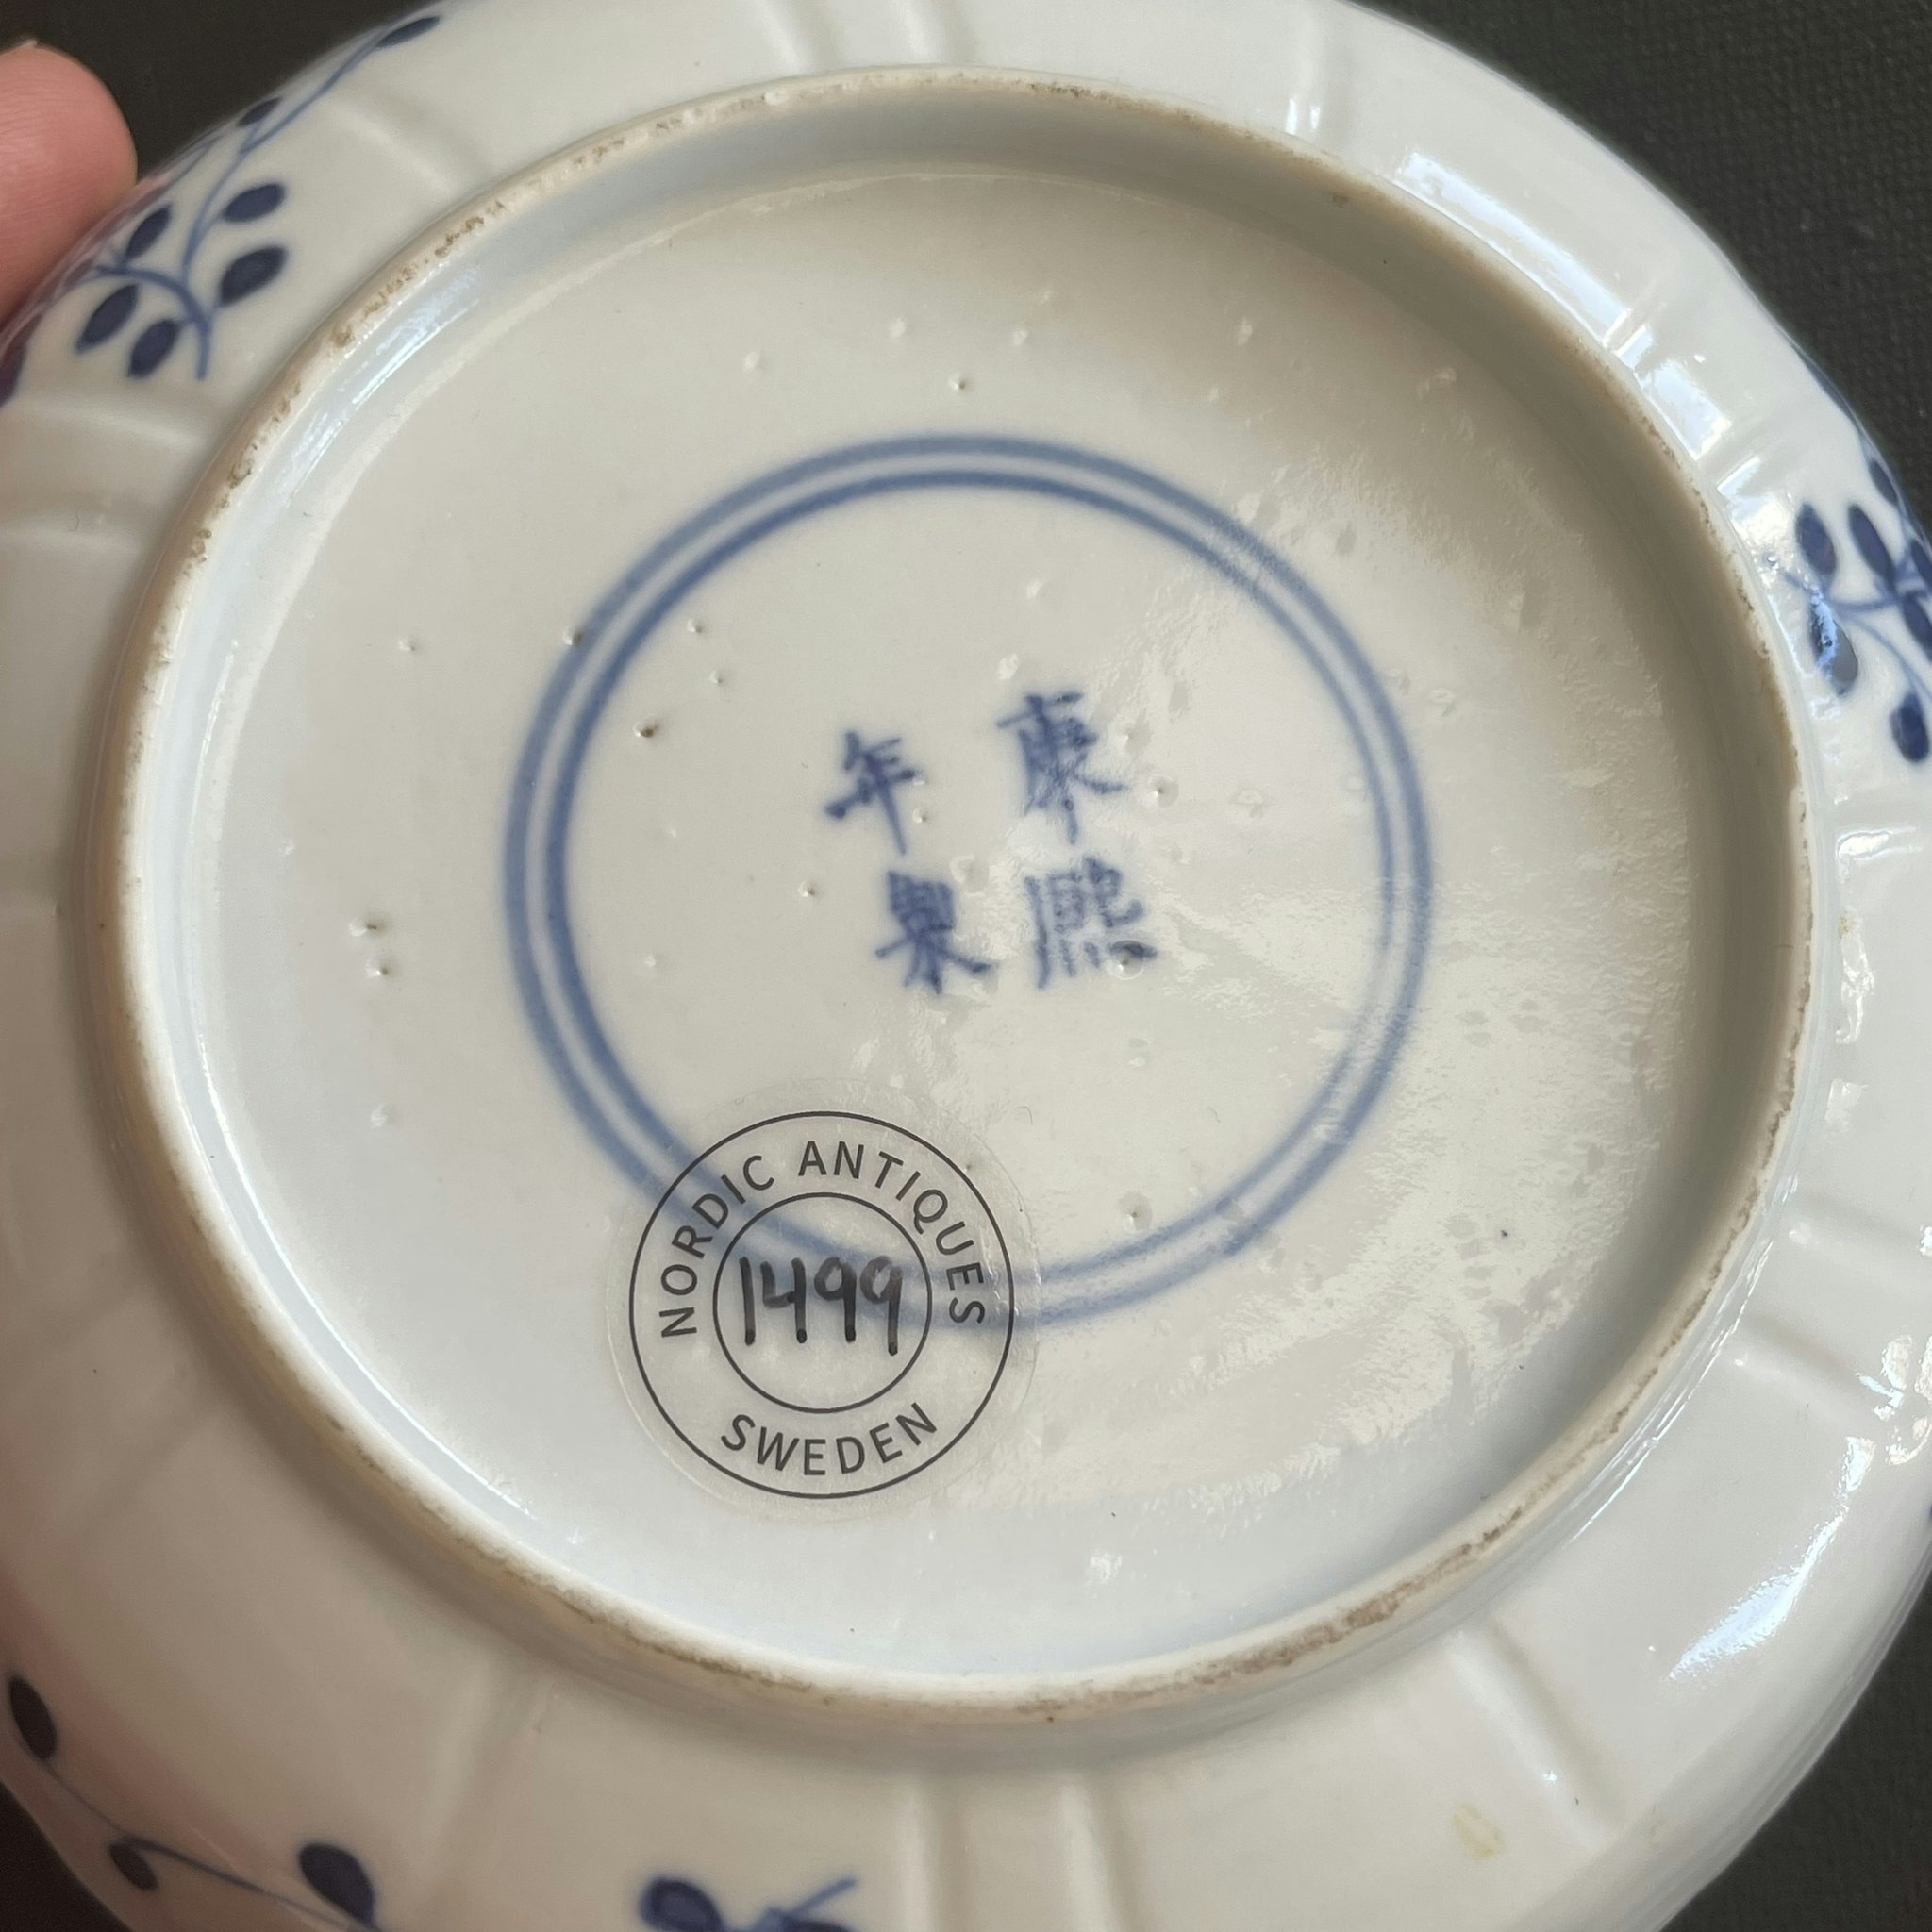 (Reserved for Olivia) Chinese teacup & saucer in underglazed blue and white, Late Qing Dynasty #1499, 1500, 1501